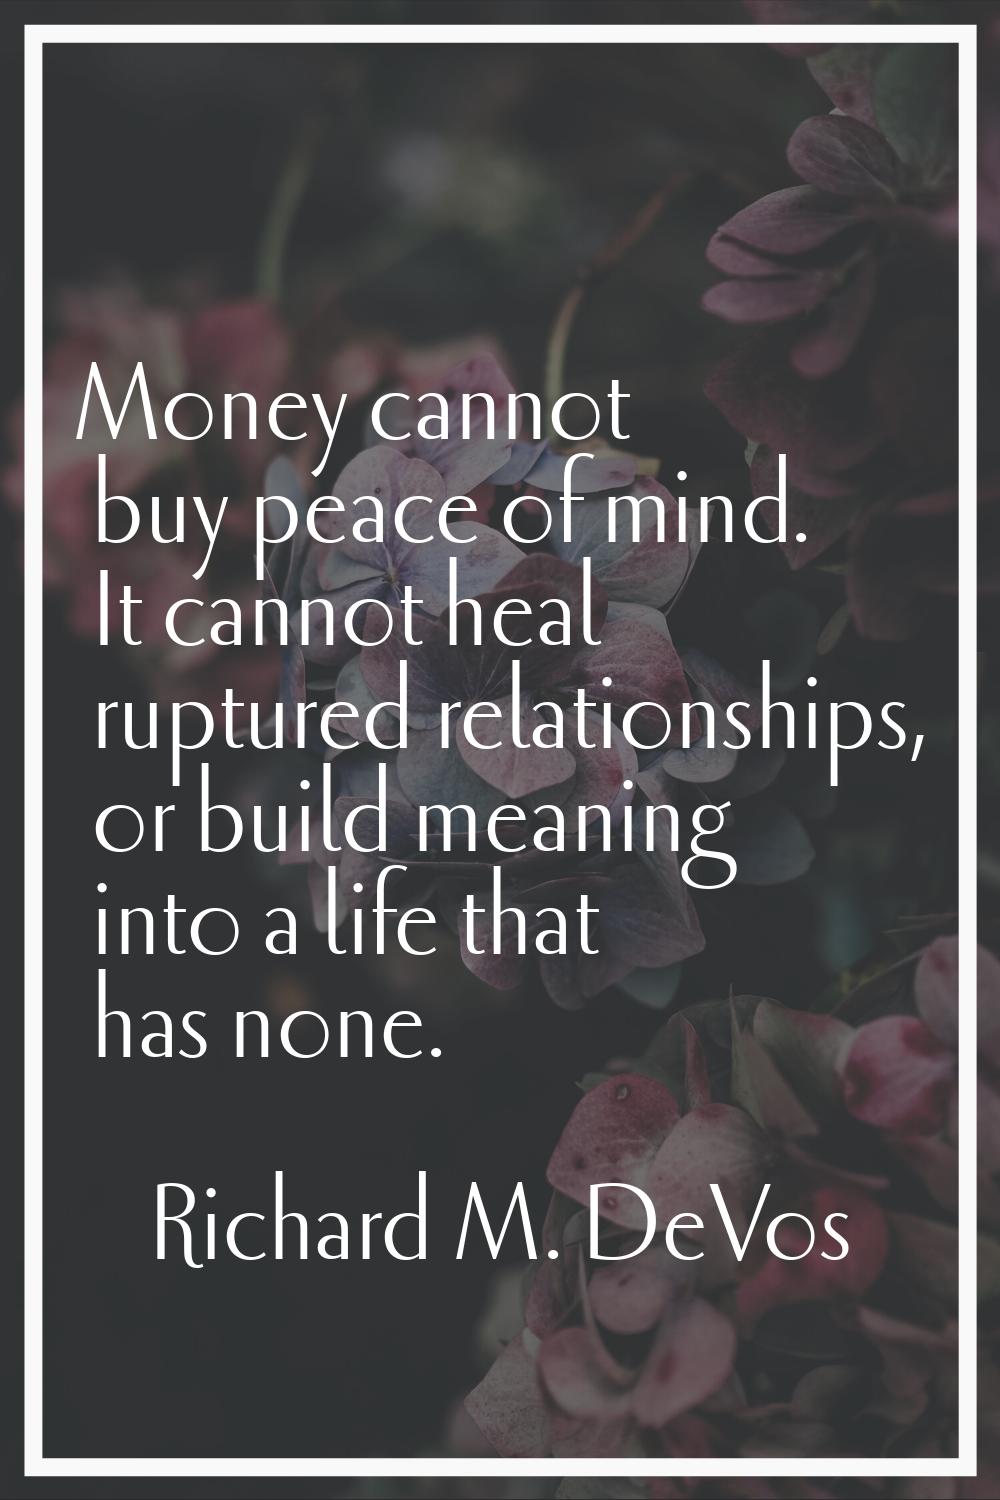 Money cannot buy peace of mind. It cannot heal ruptured relationships, or build meaning into a life